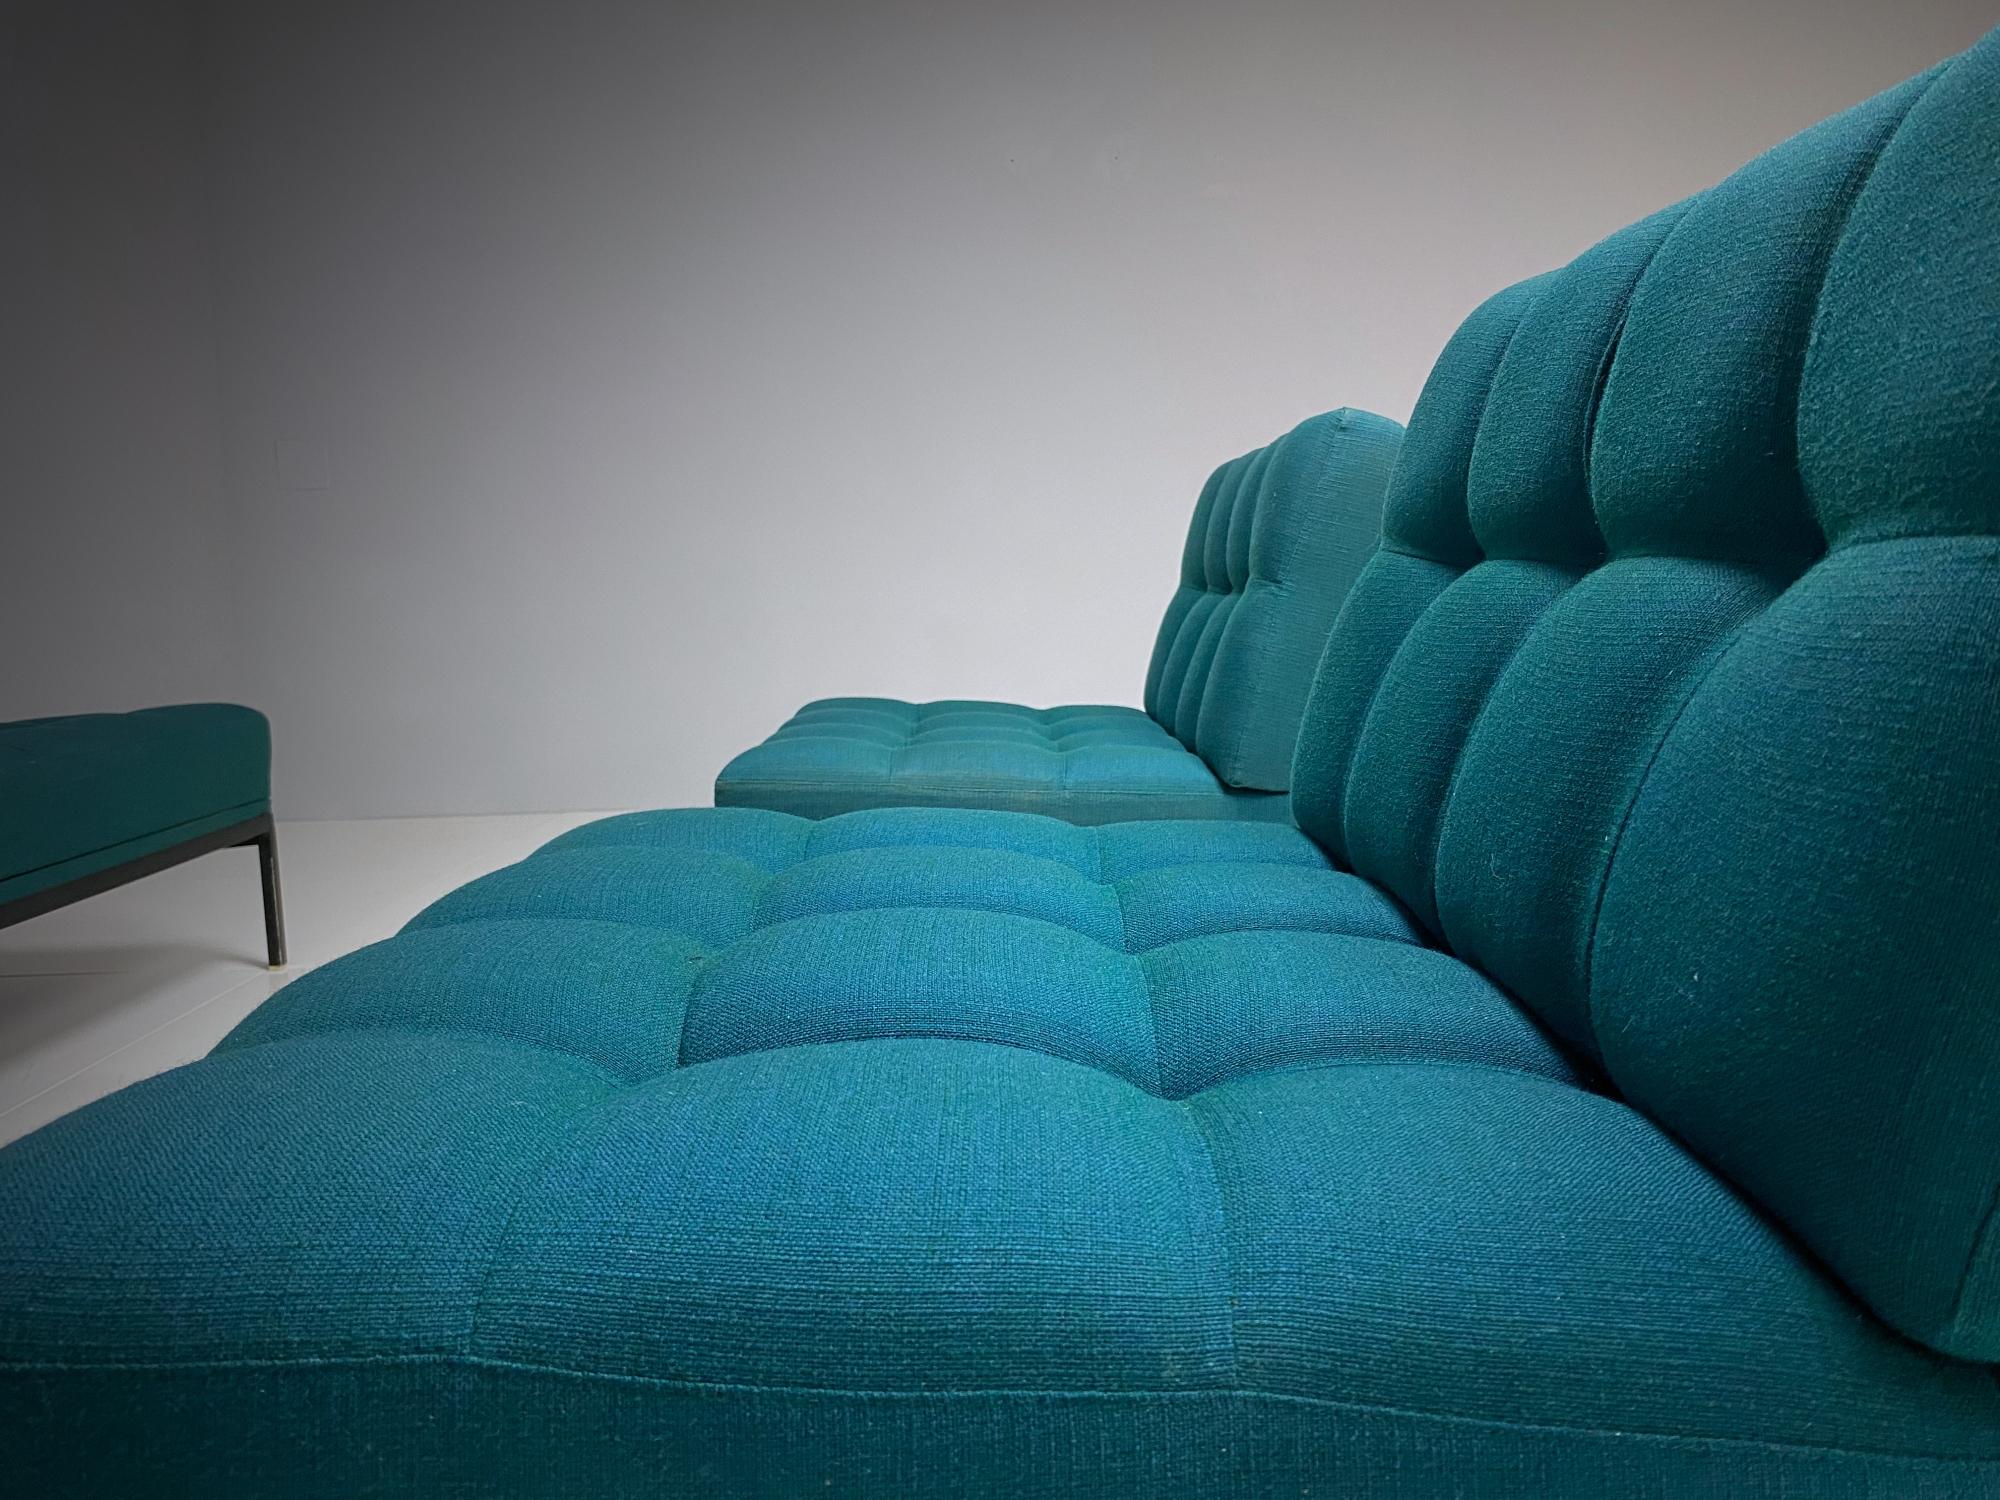 Wittmann Constanze Tufted Midcentury Sofa & Chairs by J. Spalt, 1970s, Austria For Sale 2